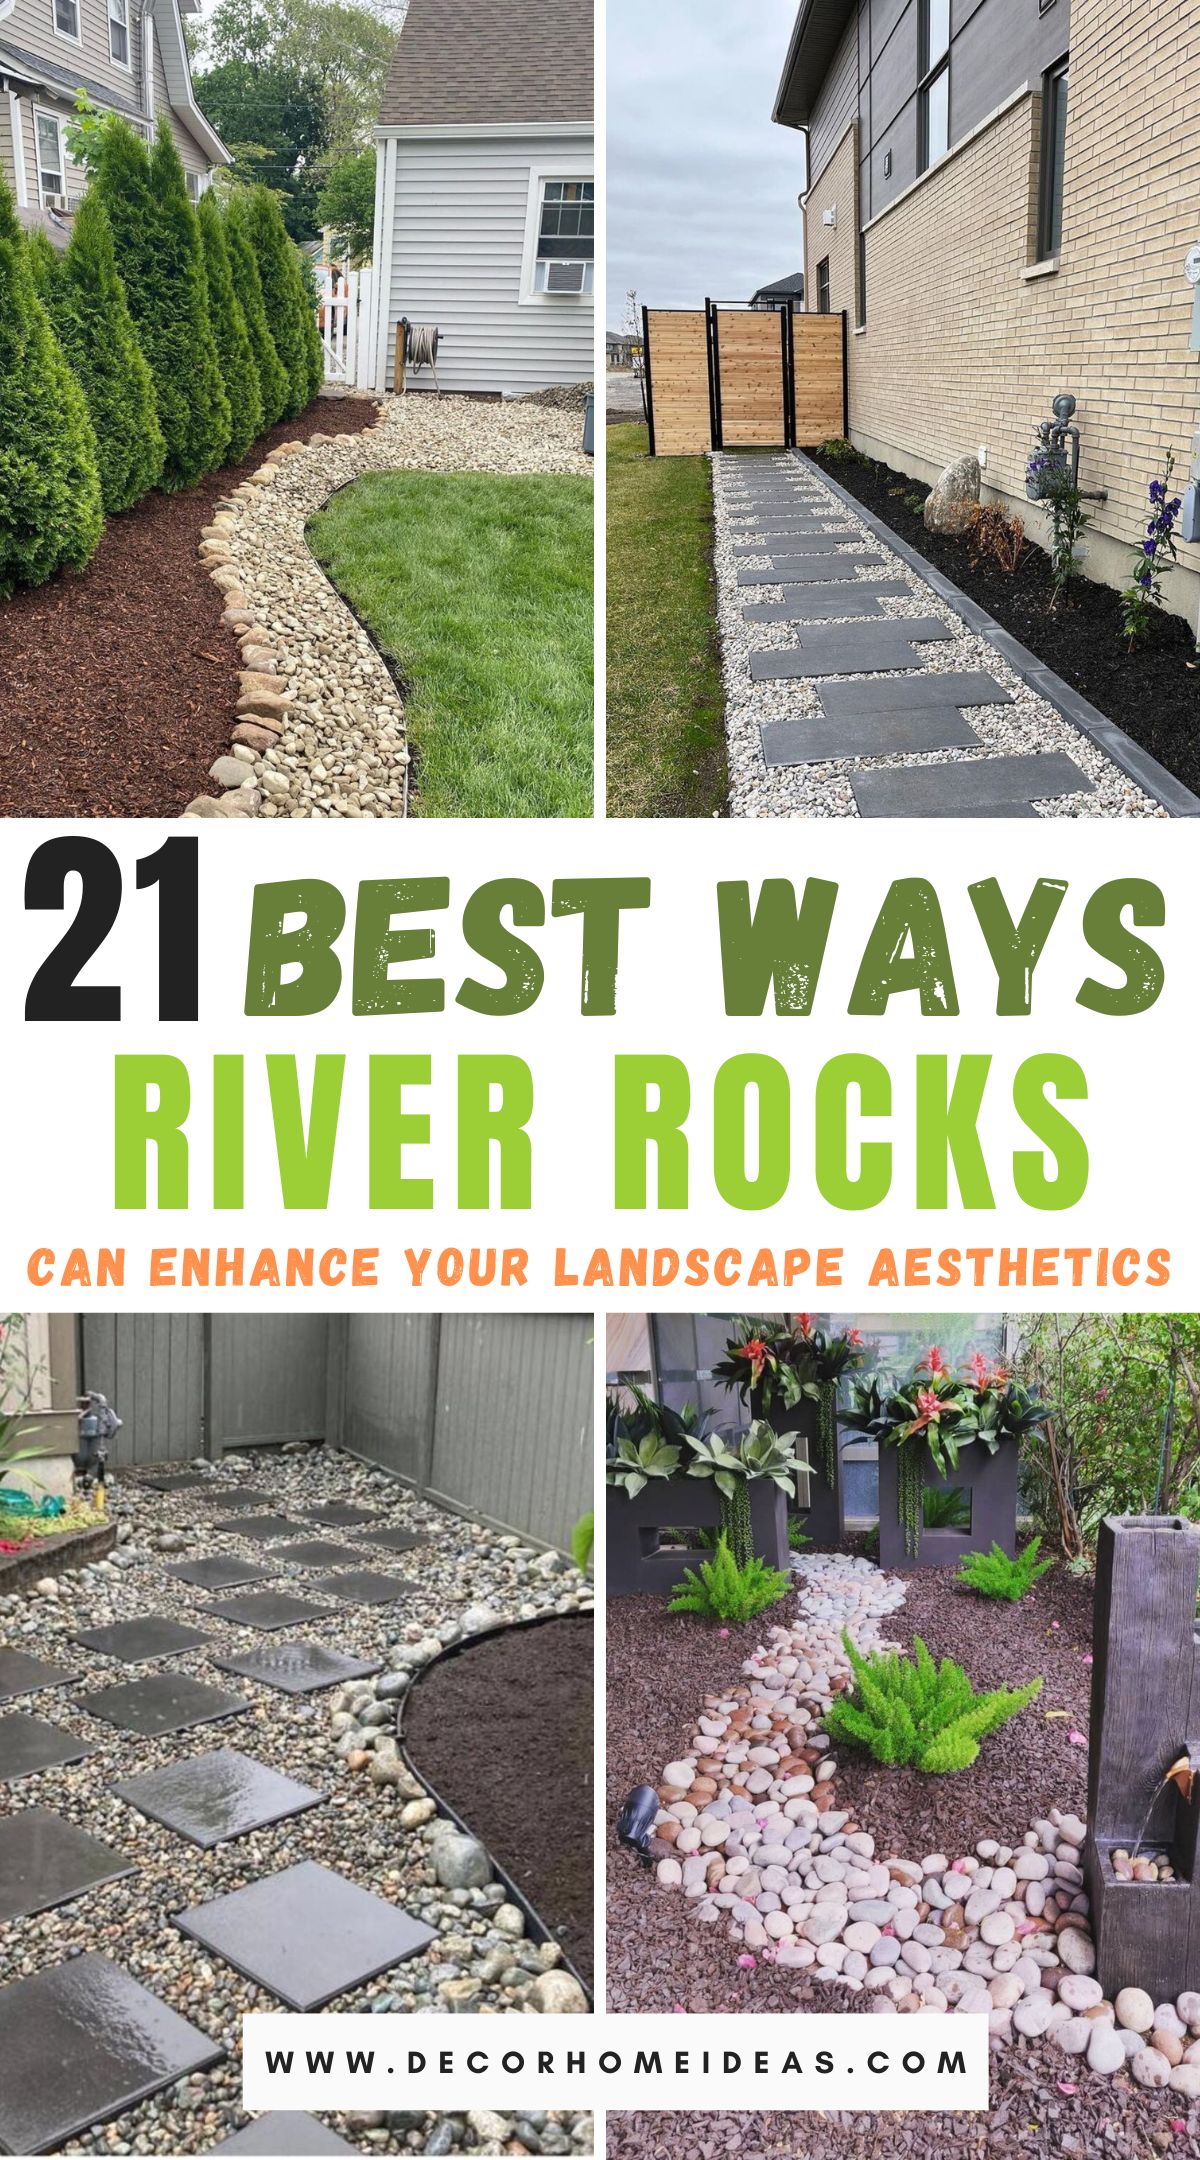 Elevate your outdoor oasis with these 21 river rock landscaping ideas. From pathways to garden borders, these versatile stones add texture, visual interest, and a touch of natural beauty to your outdoor space.